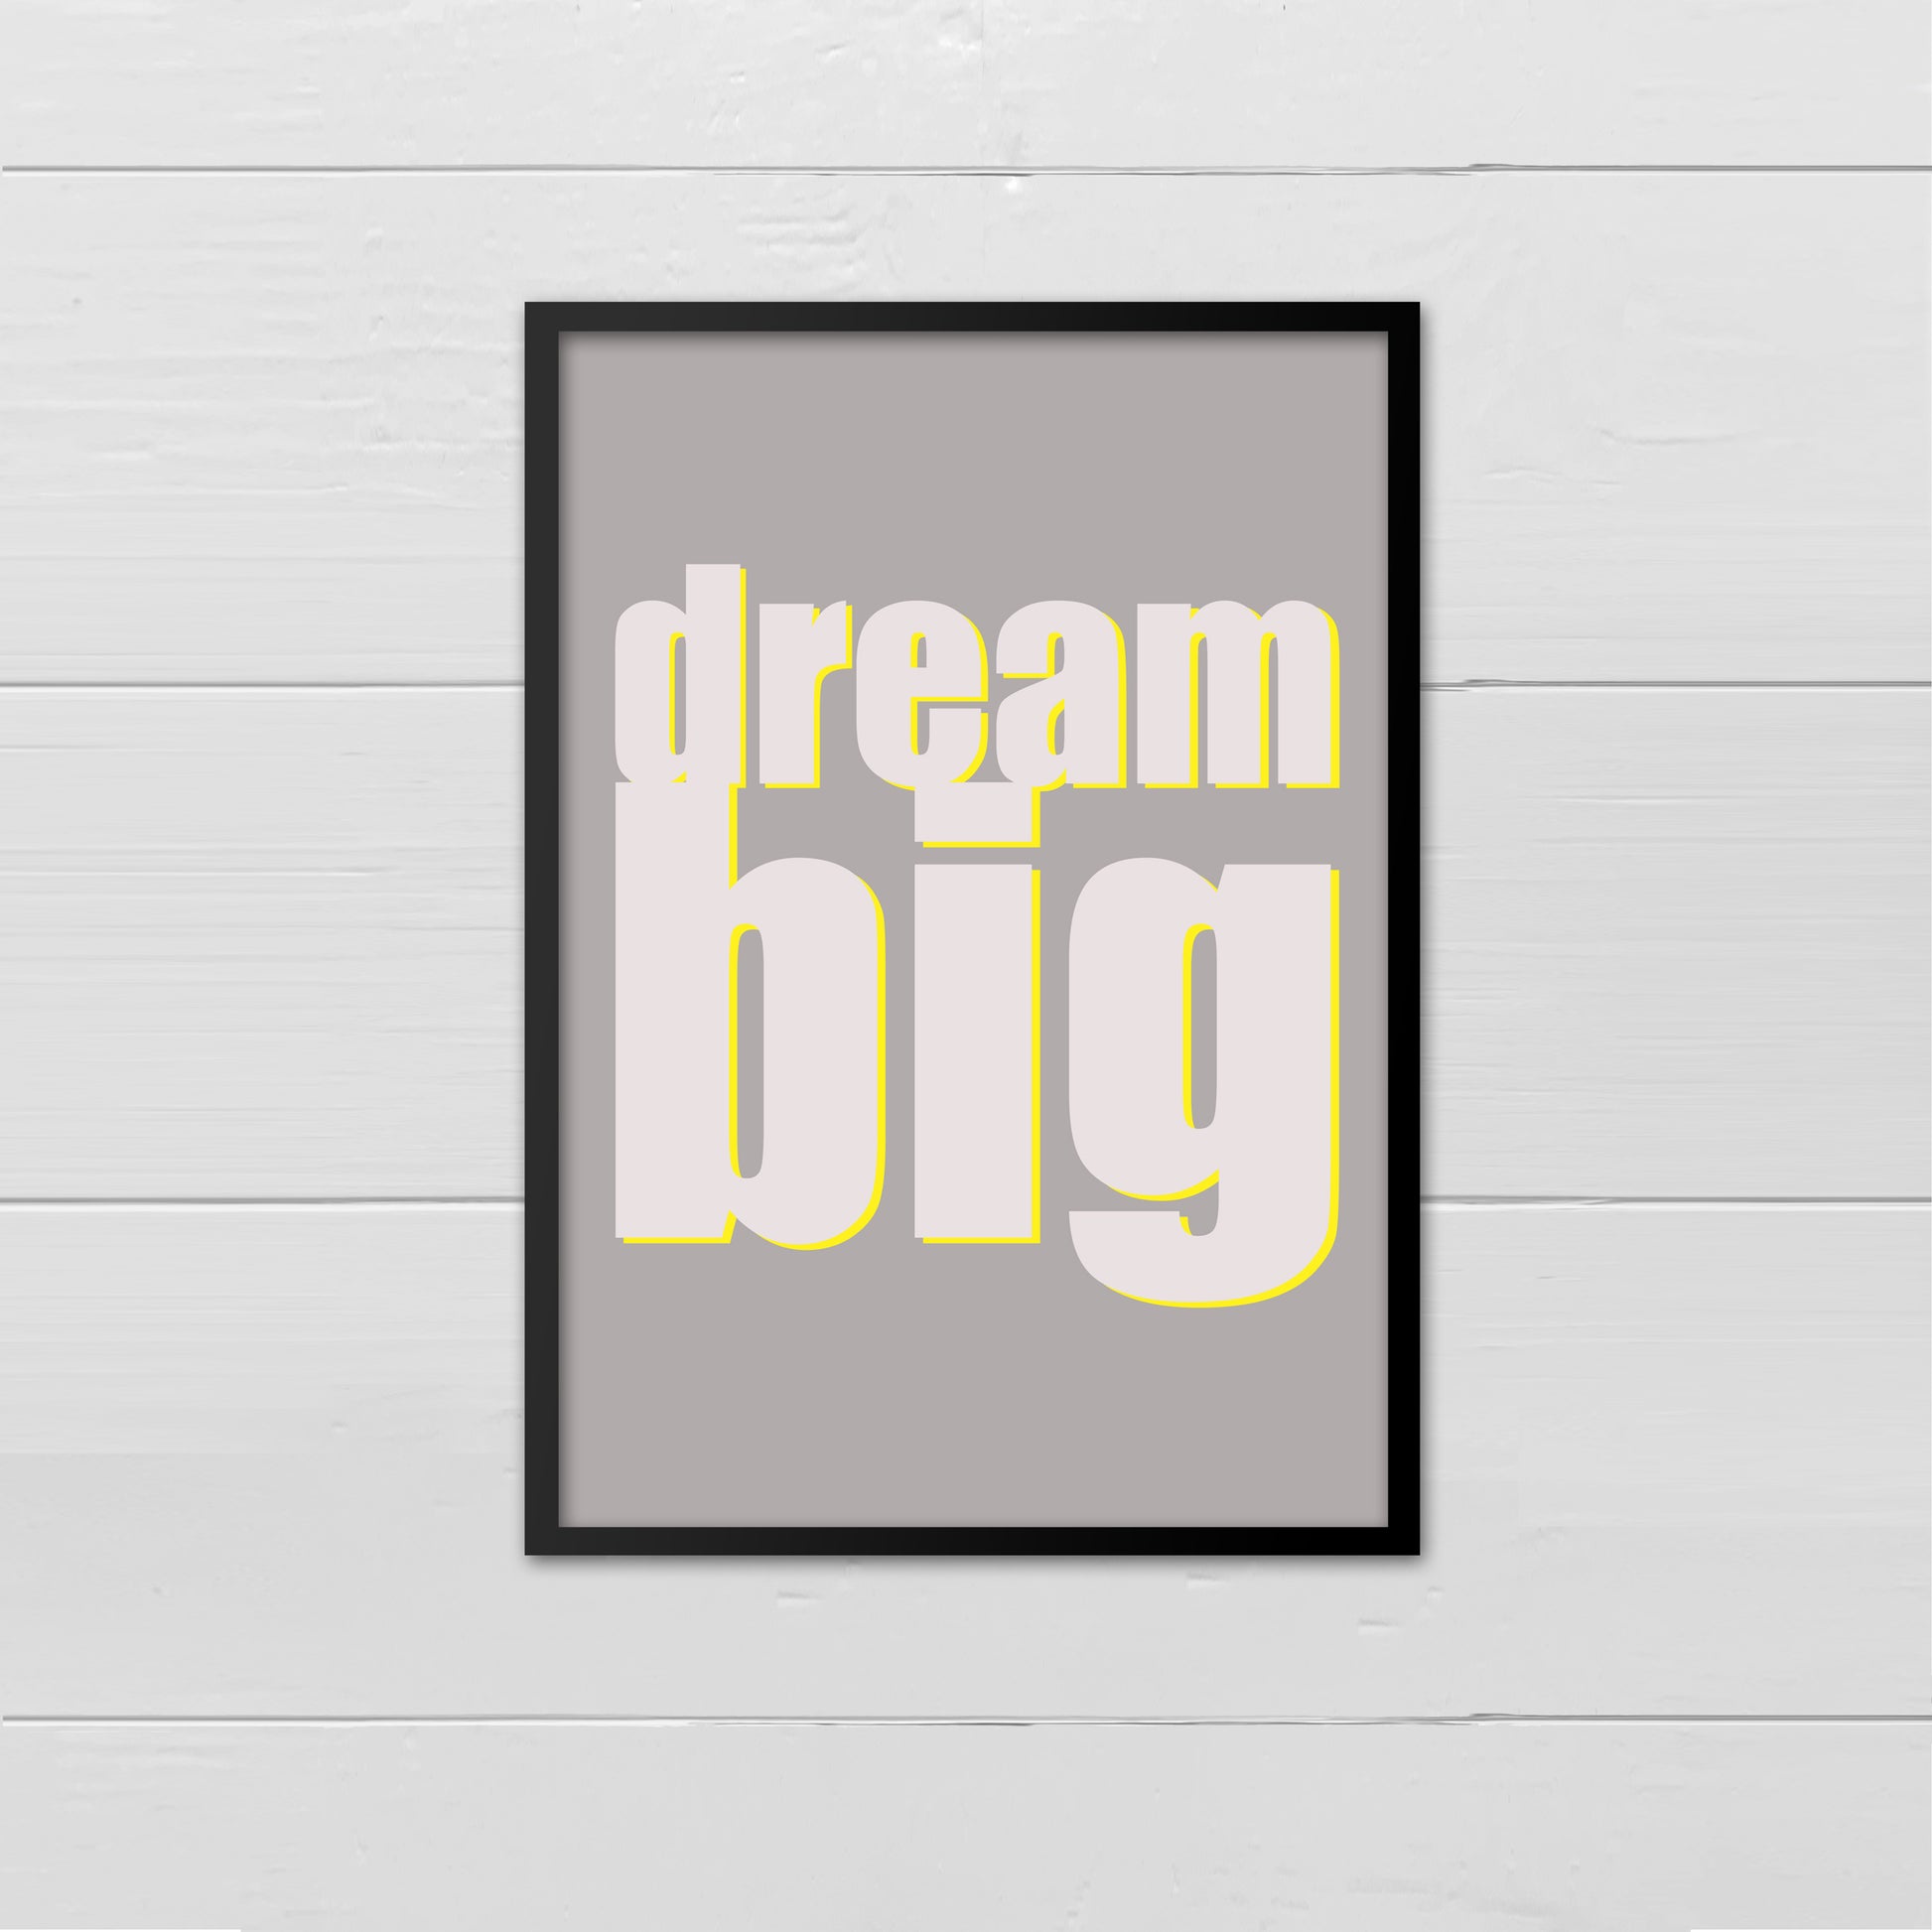 Portrait style print with the words Dream Big printed in large lowercase letters in pale grey, with a bright yellow drop shadow onto a mid grey cream background